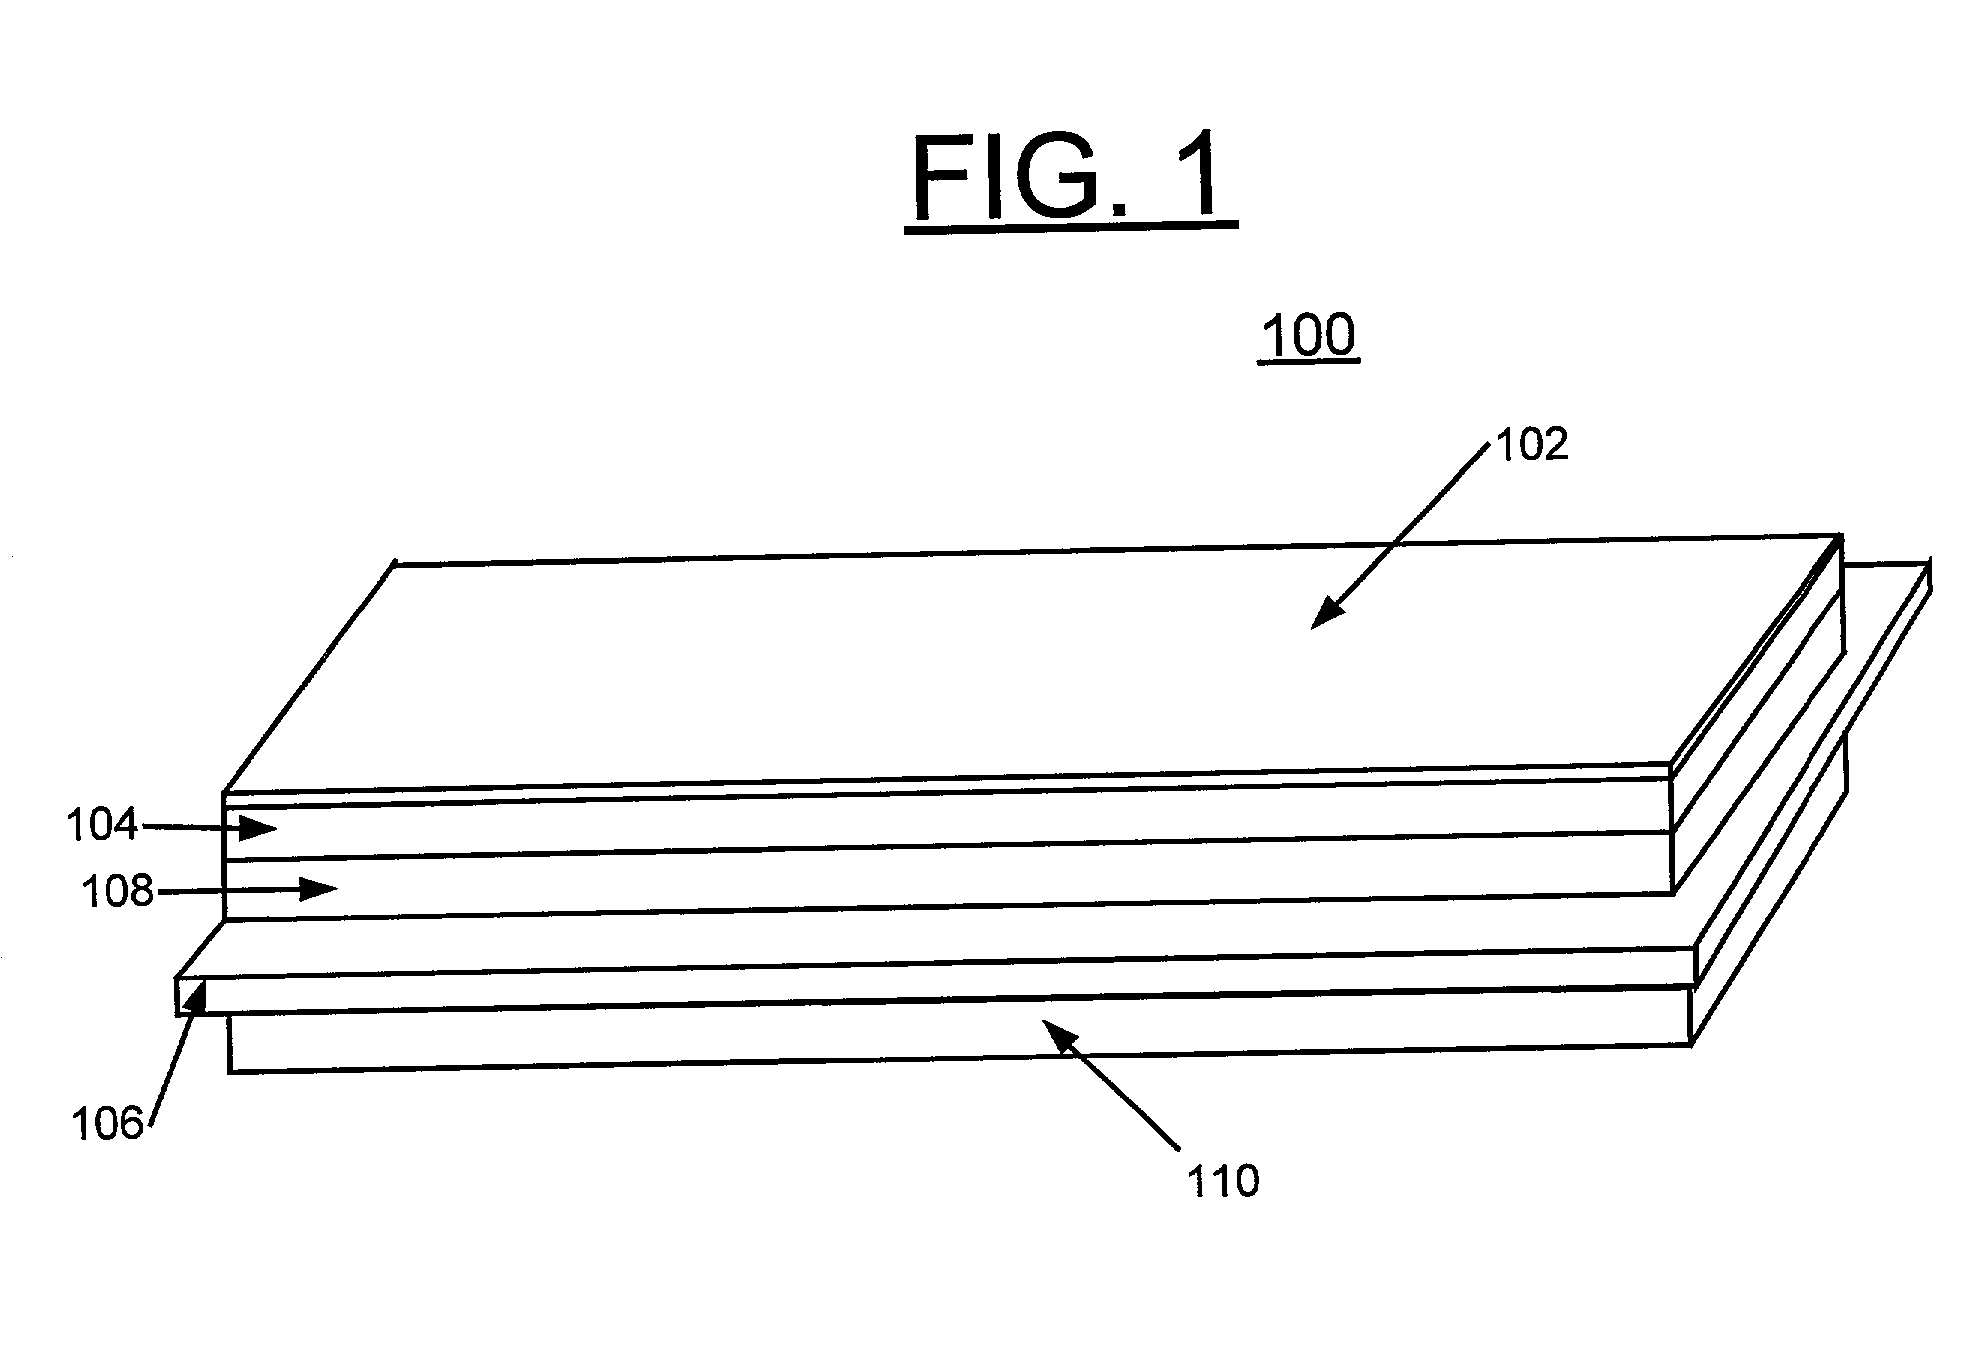 Solid oxide fuel cell with enhanced mechanical and electrical properties